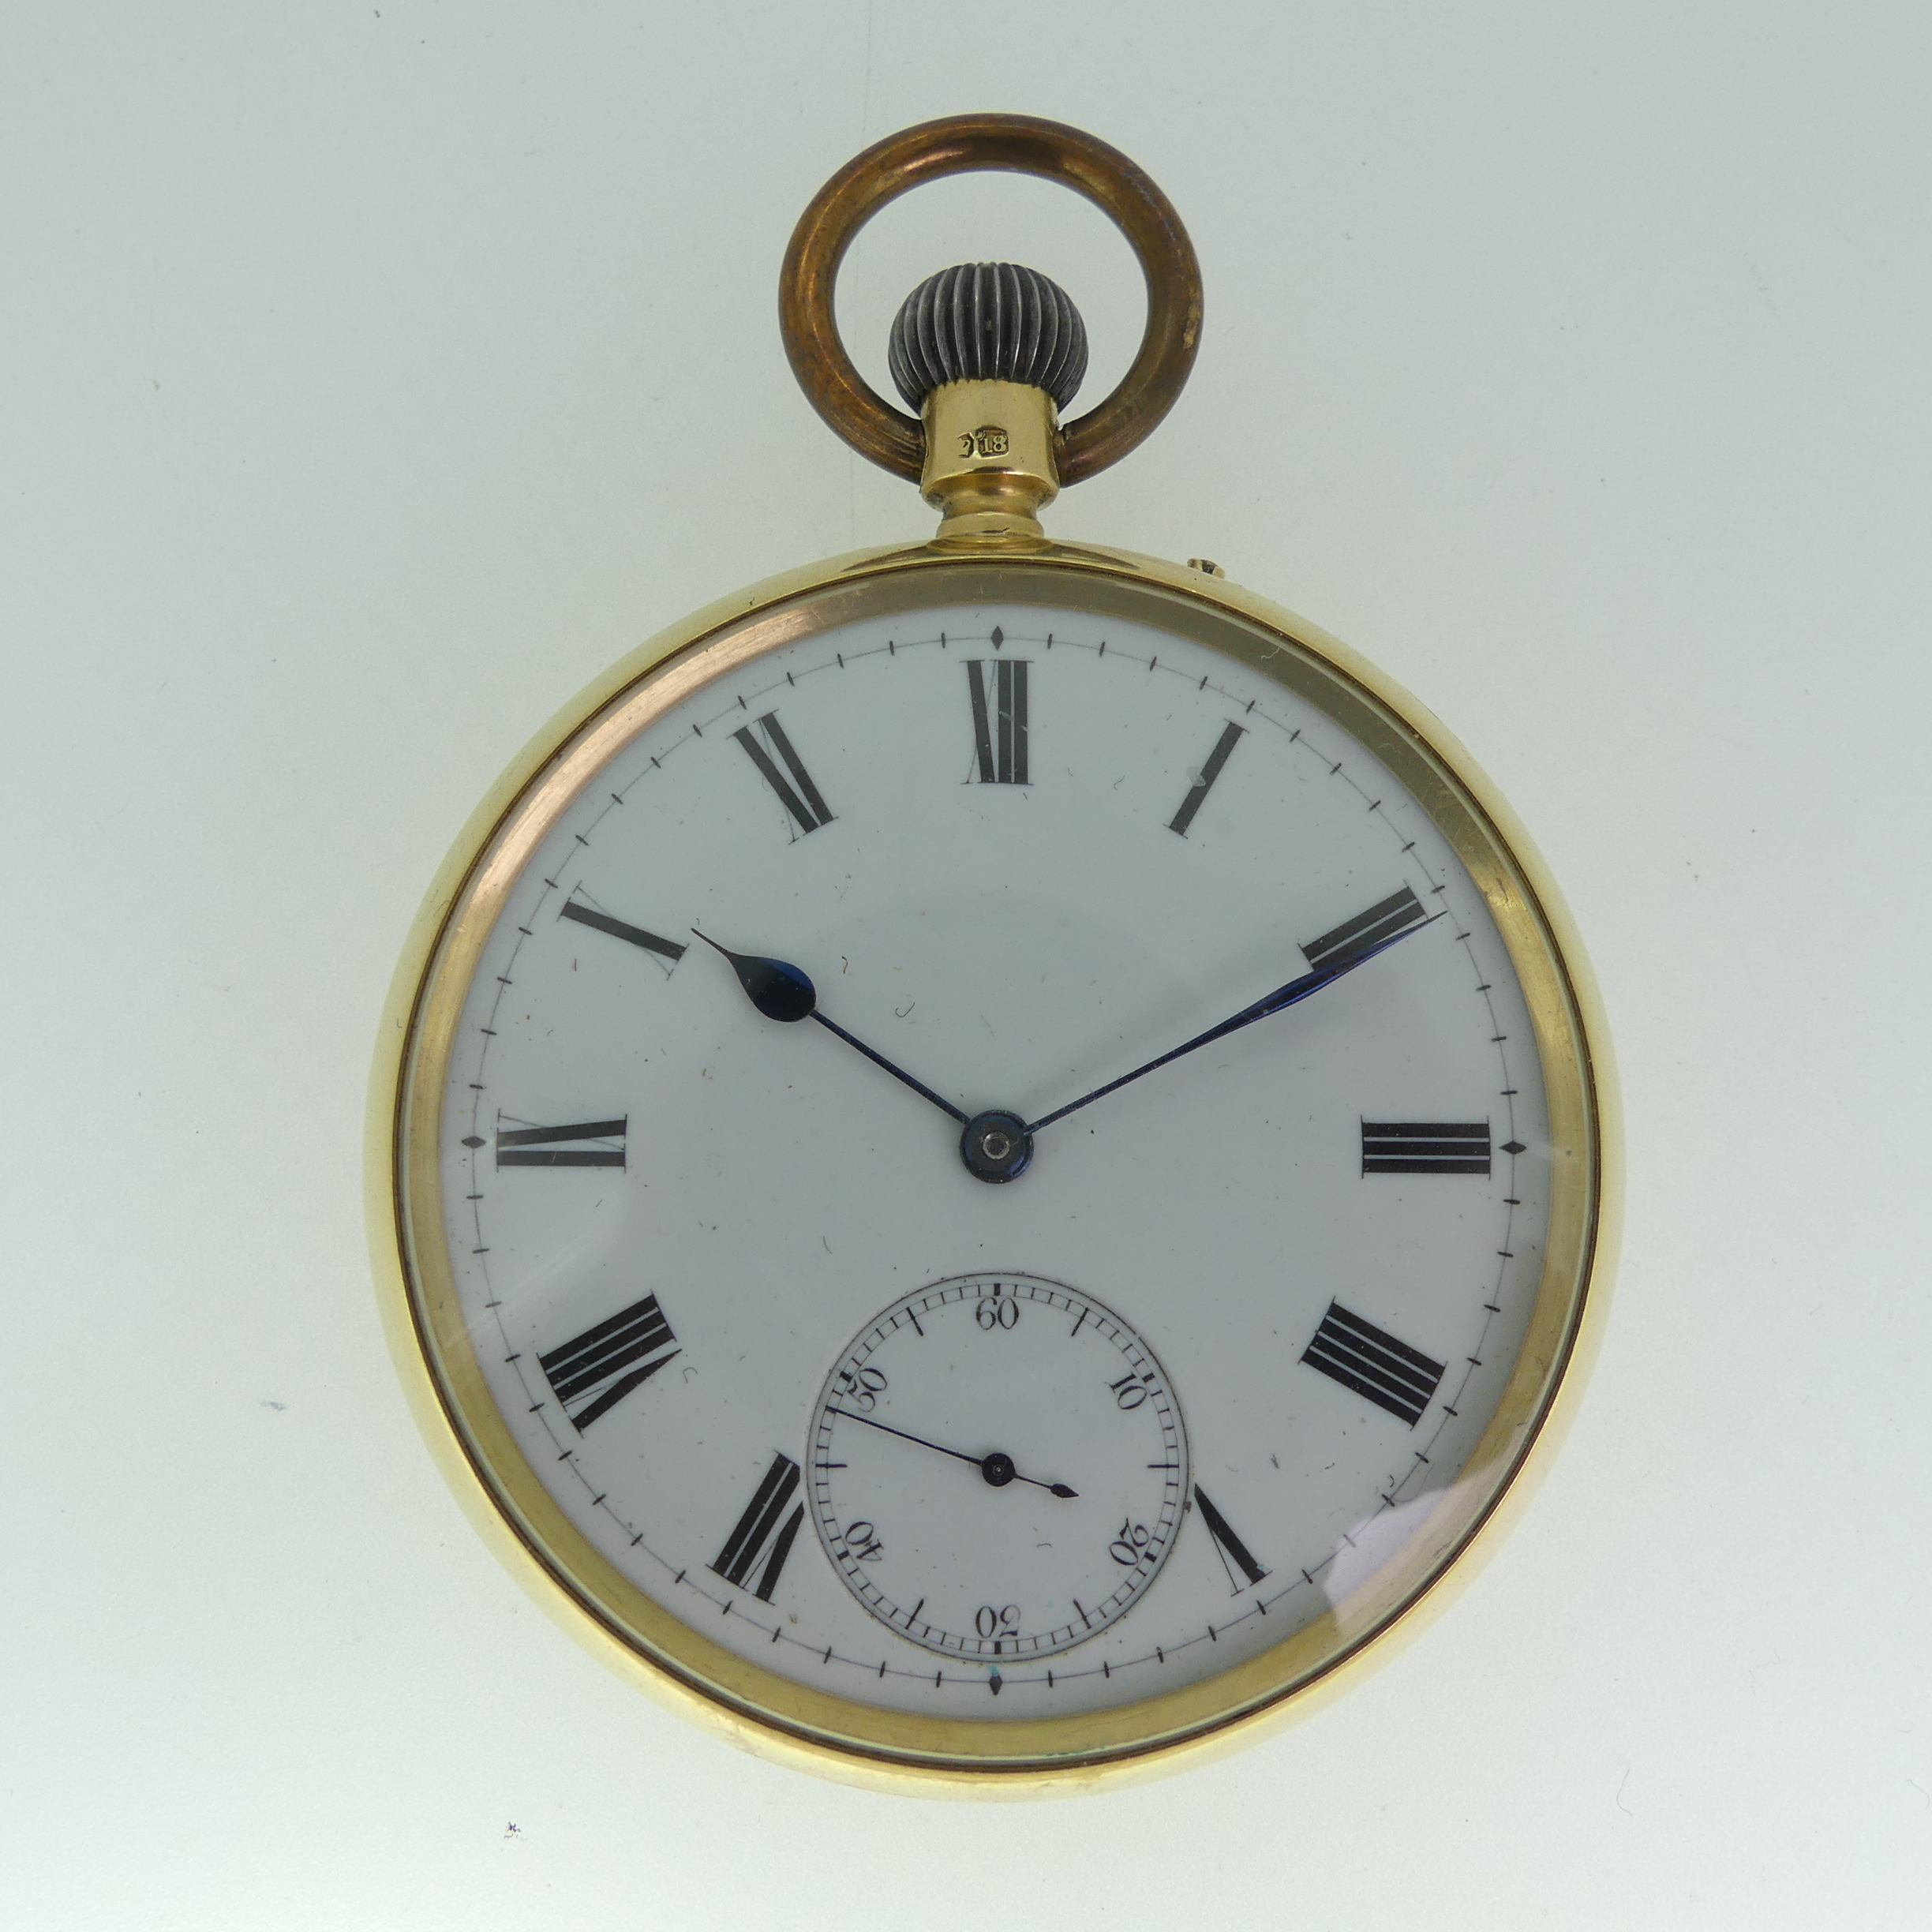 An 18ct gold open face Pocket Watch, unsigned white enamel dial with black Roman Numerals and